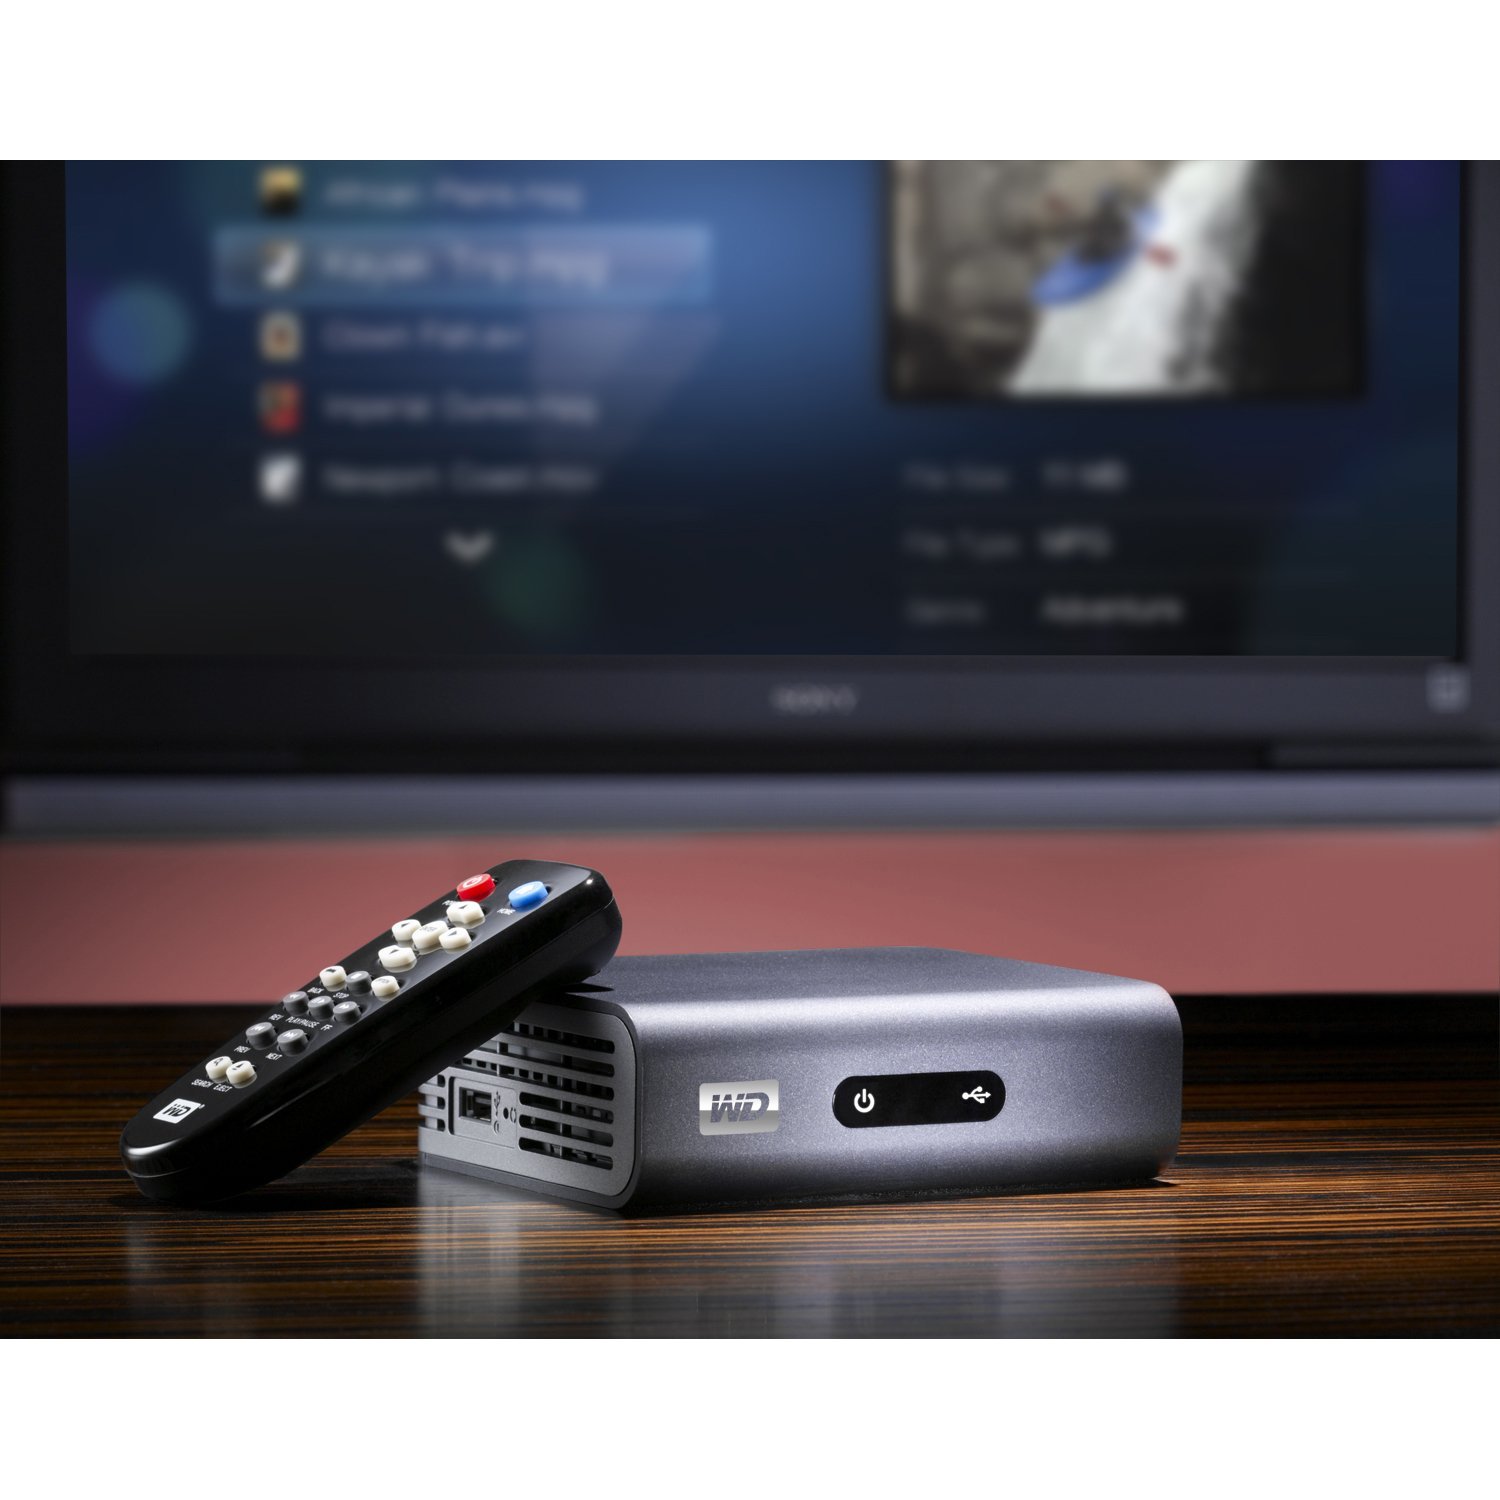 http://thetechjournal.com/wp-content/uploads/images/1107/1312108722-western-digital-wd-tv-live-plus-1080p-hd-media-player-9.jpg